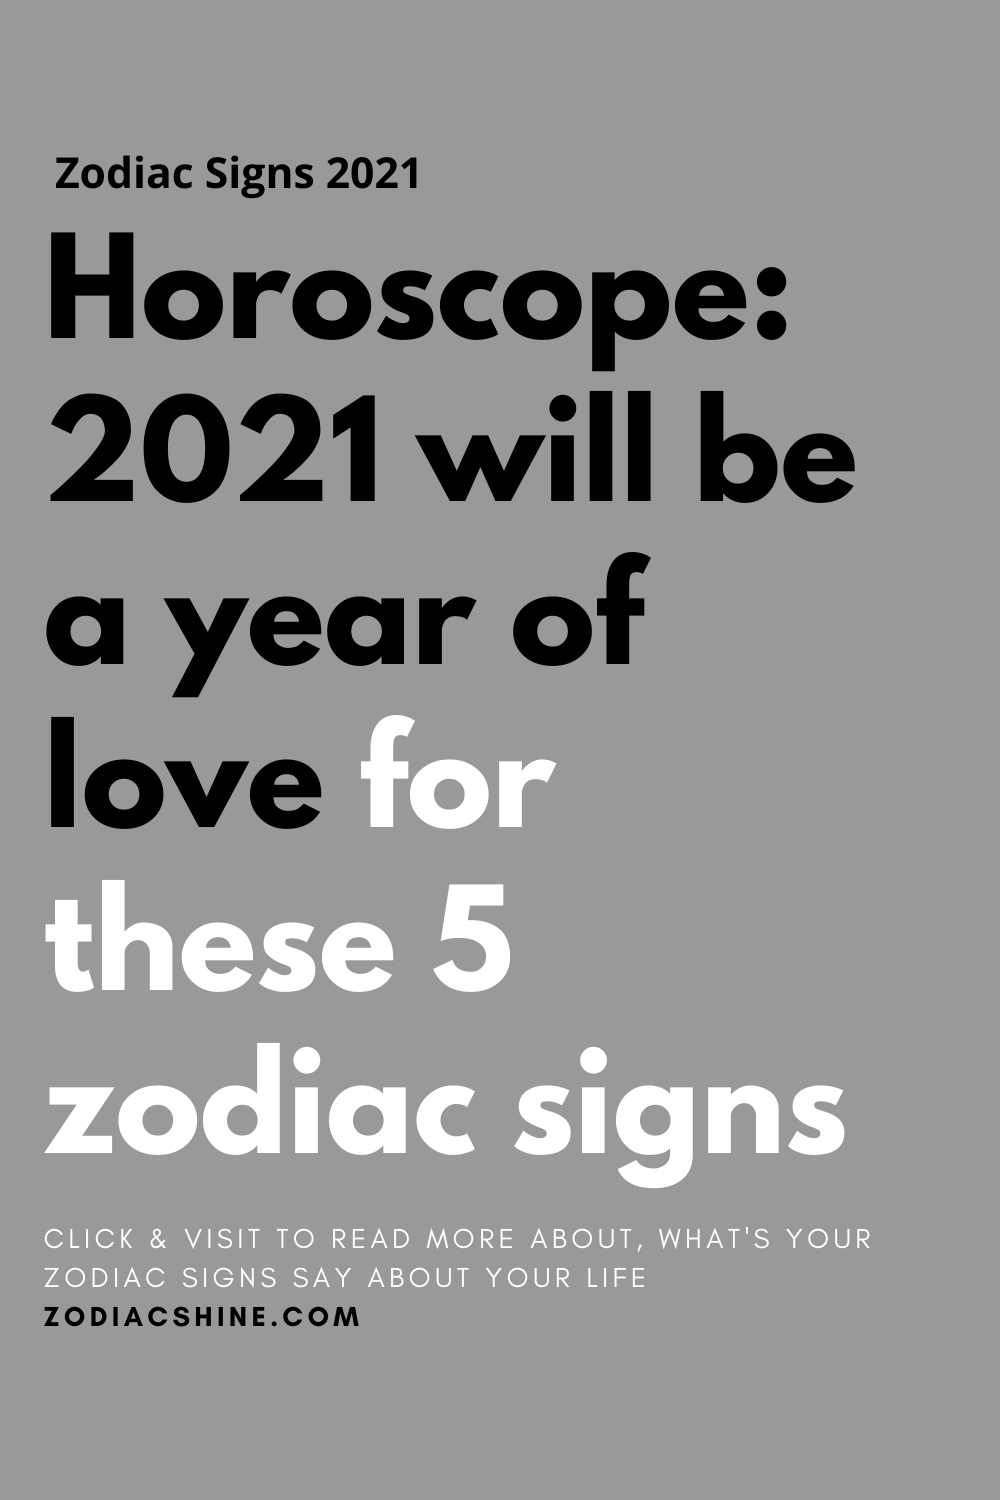 Horoscope: 2021 will be a year of love for these 5 zodiac signs